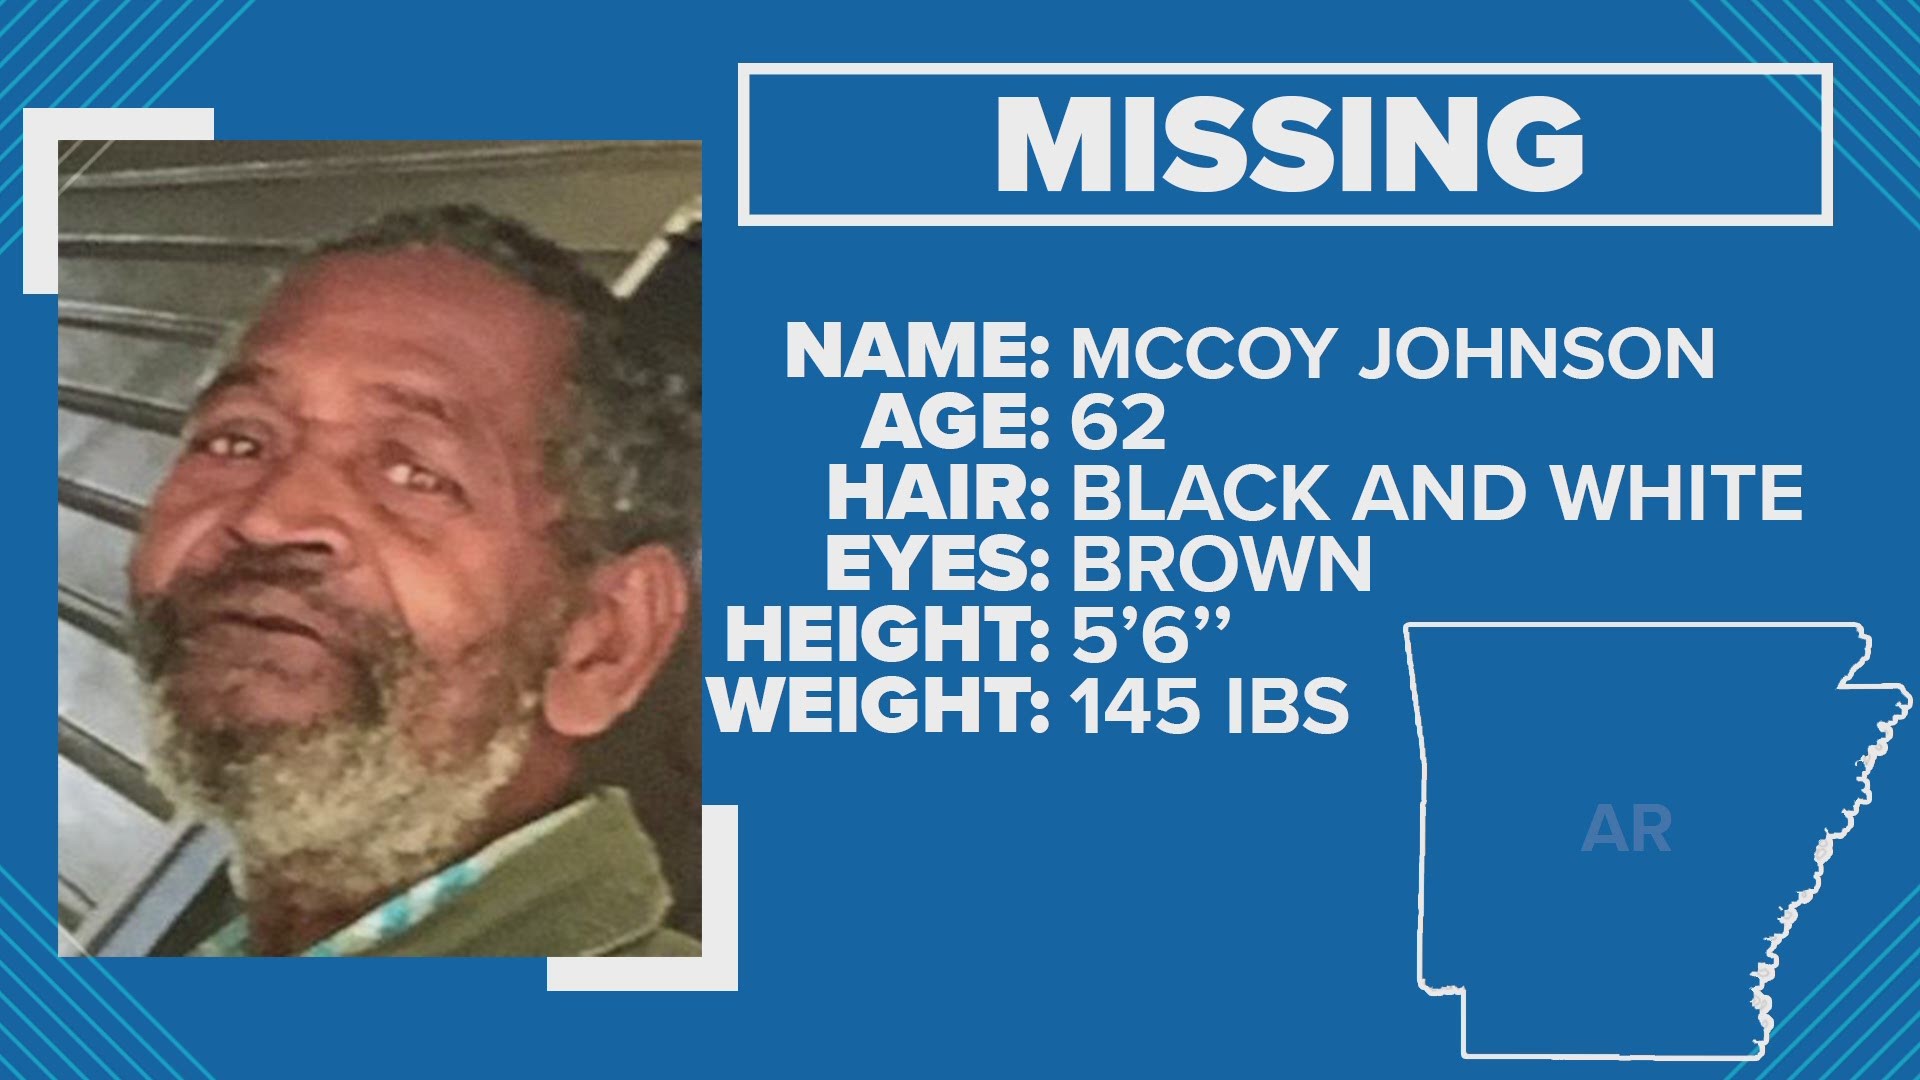 The Little Rock Police Department has activated a Silver Alert in search of 62-year-old McCoy Johnson.